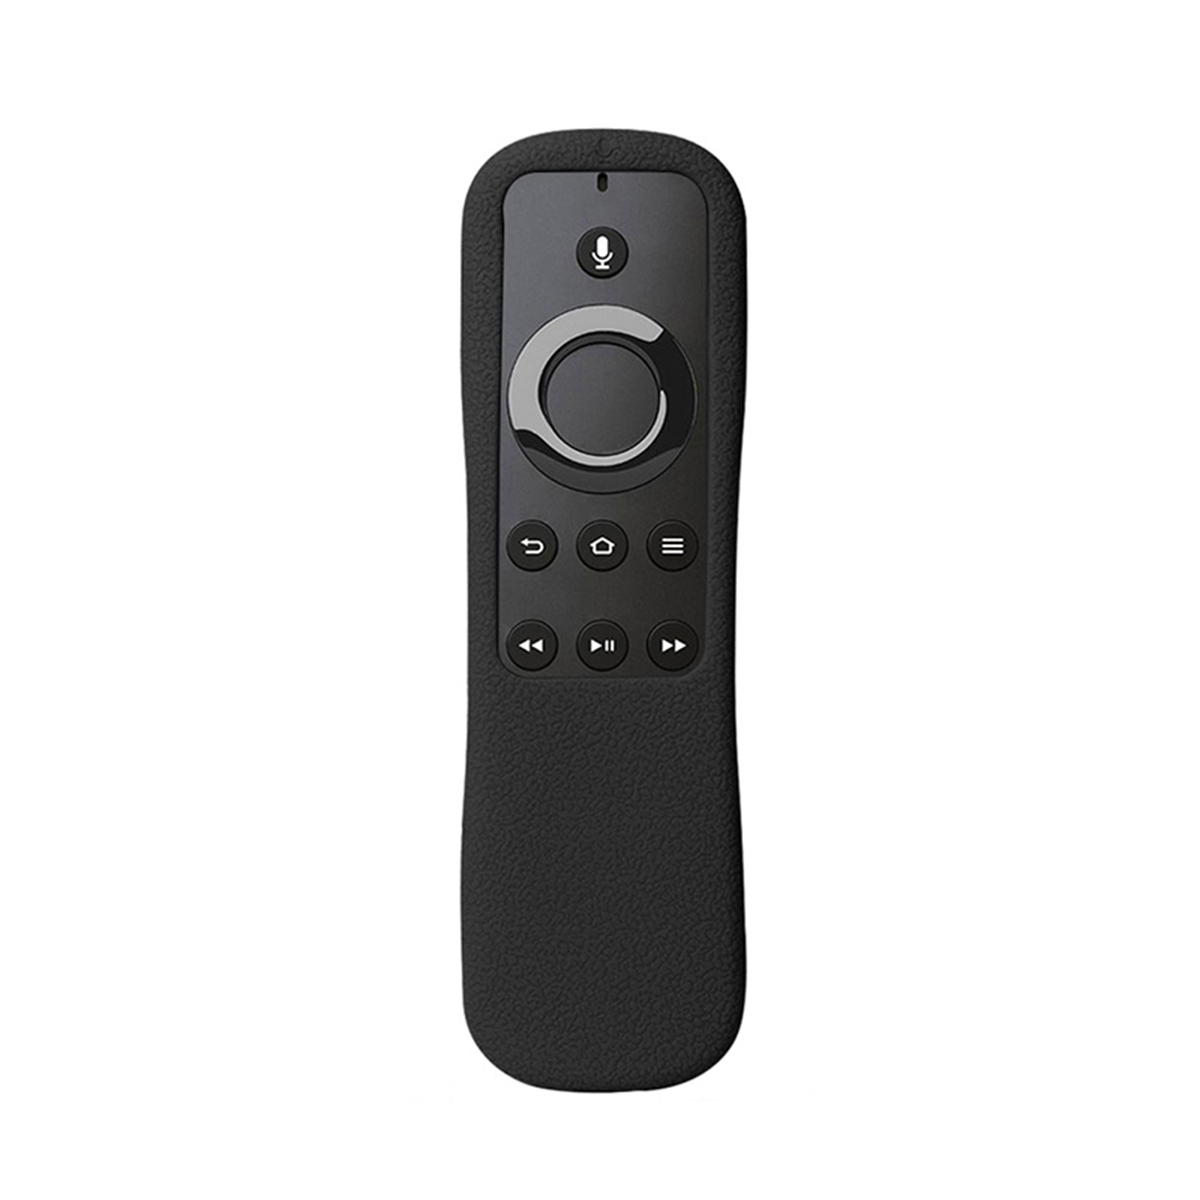 Find Black TV Remote Control Cover Skin For Amazon Alexa Voice Fire TV Remote Newest Second Generation for Sale on Gipsybee.com with cryptocurrencies